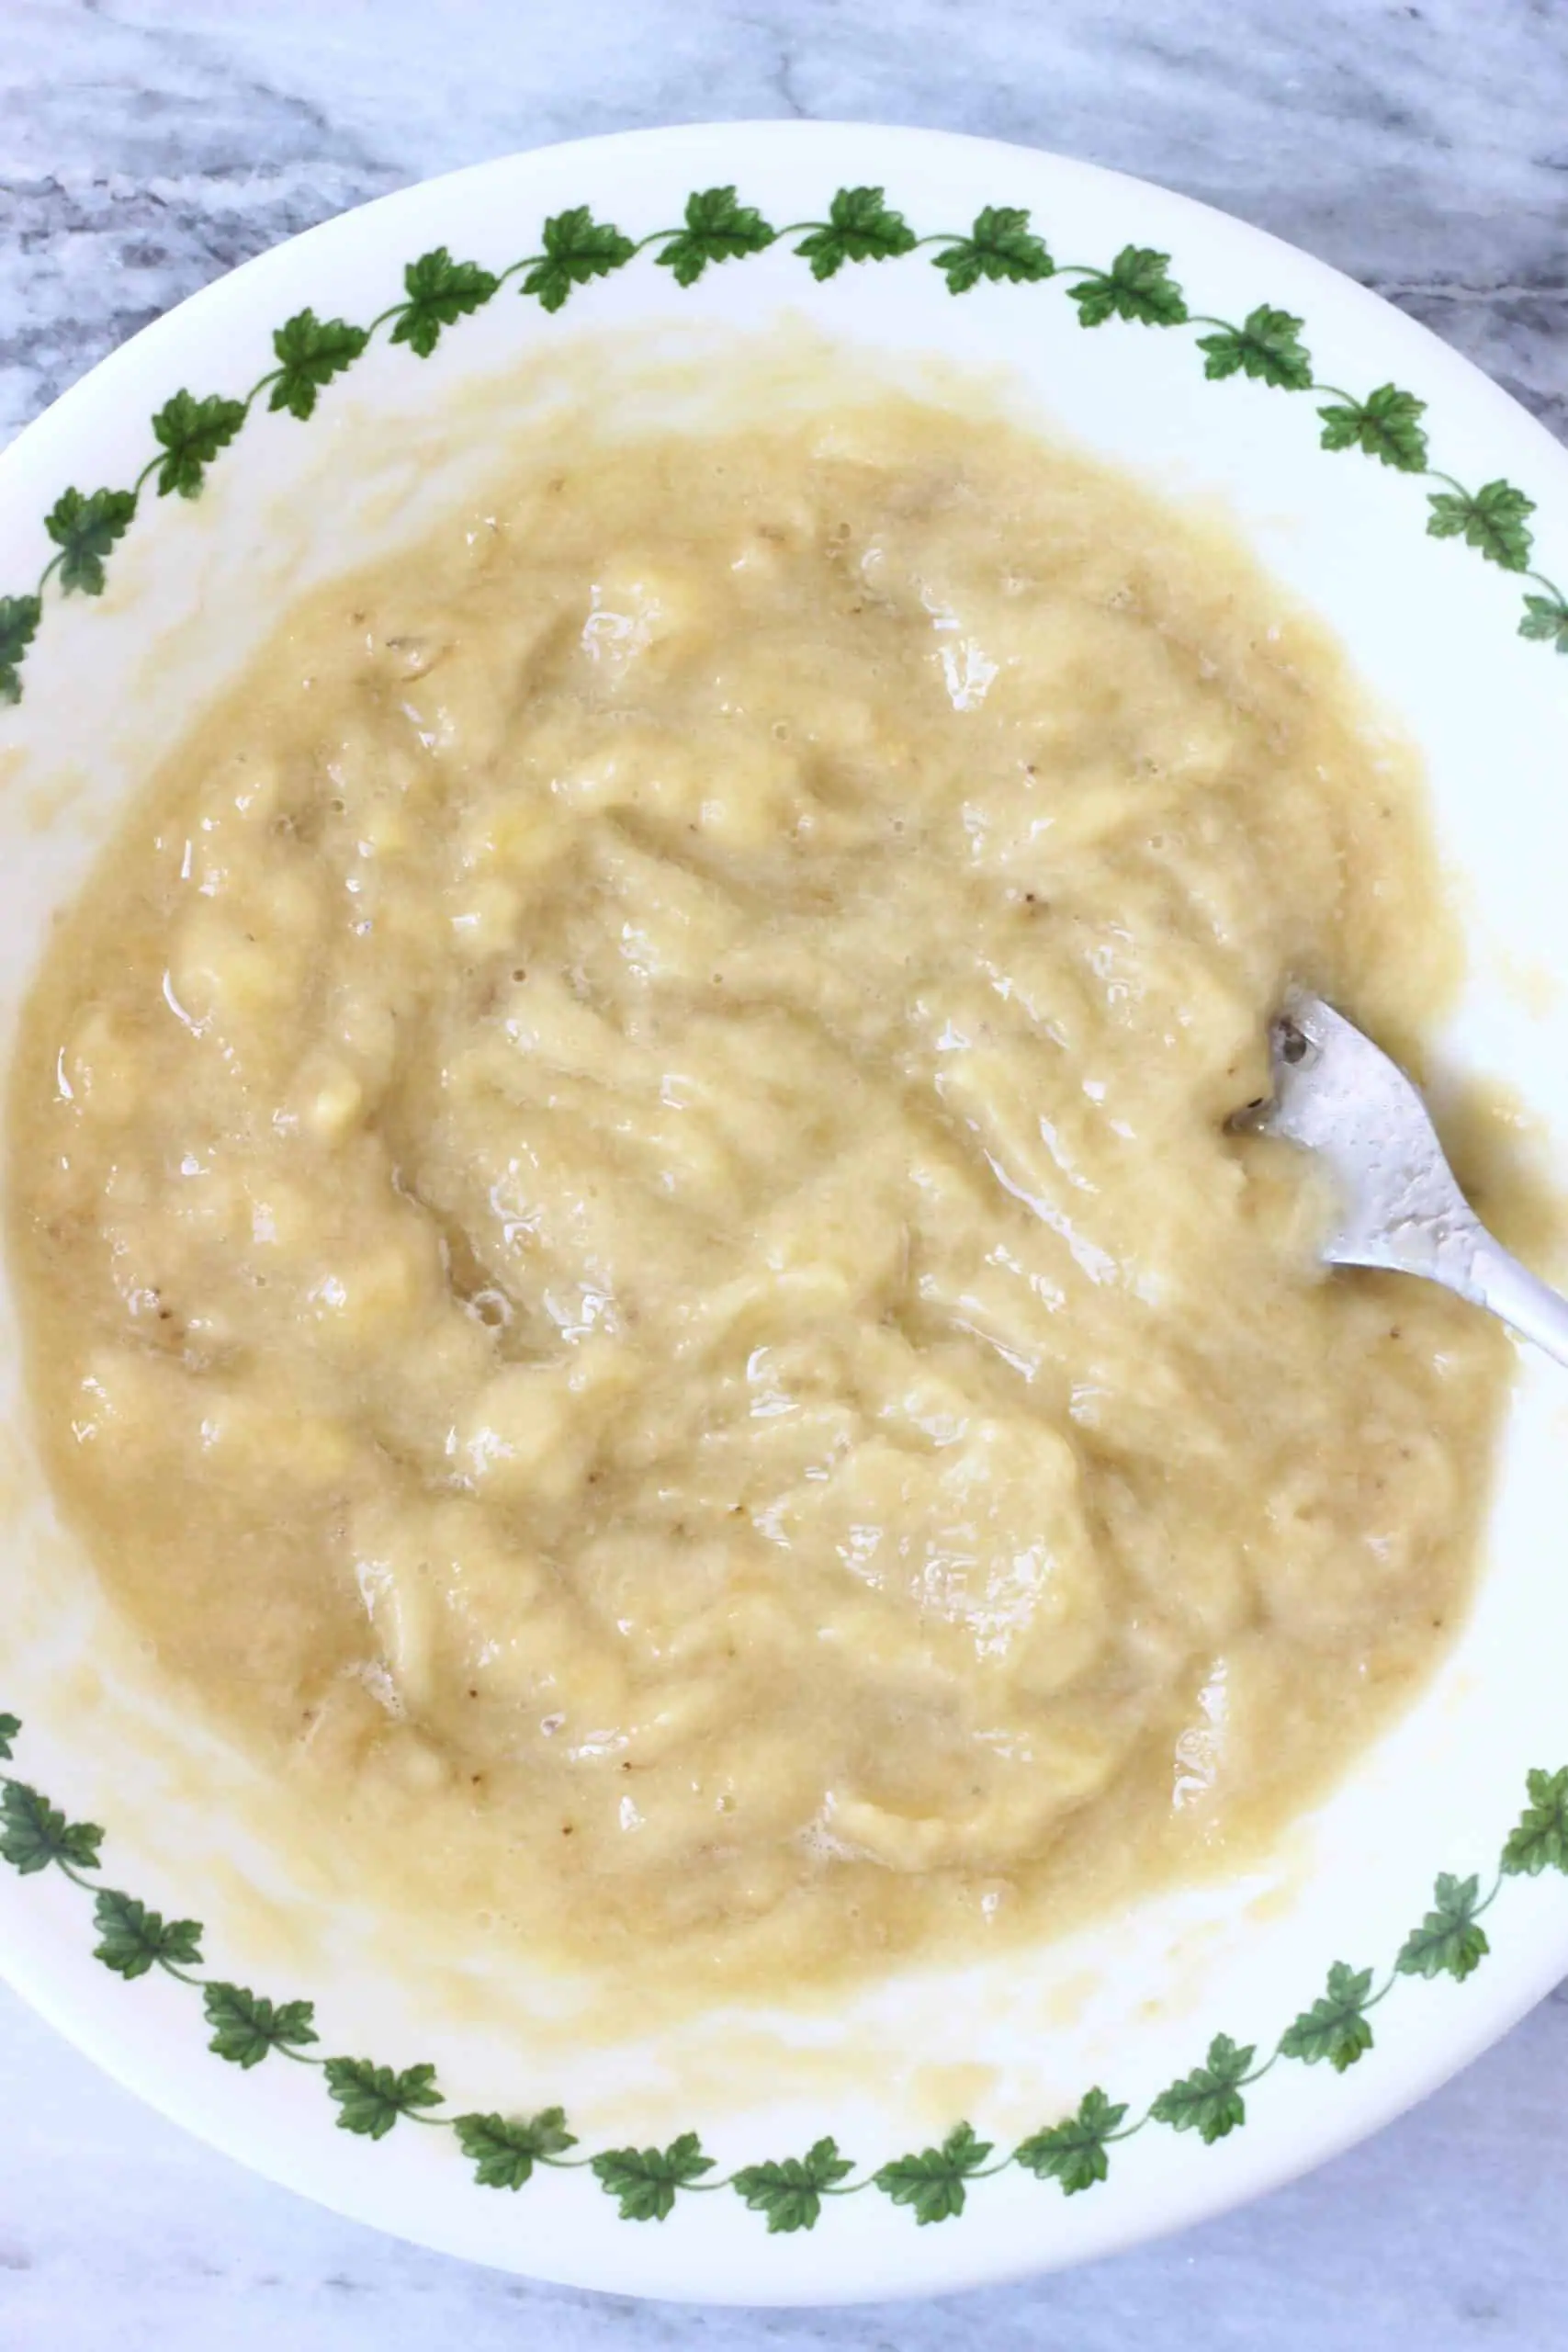 Mashed bananas in a bowl with a fork